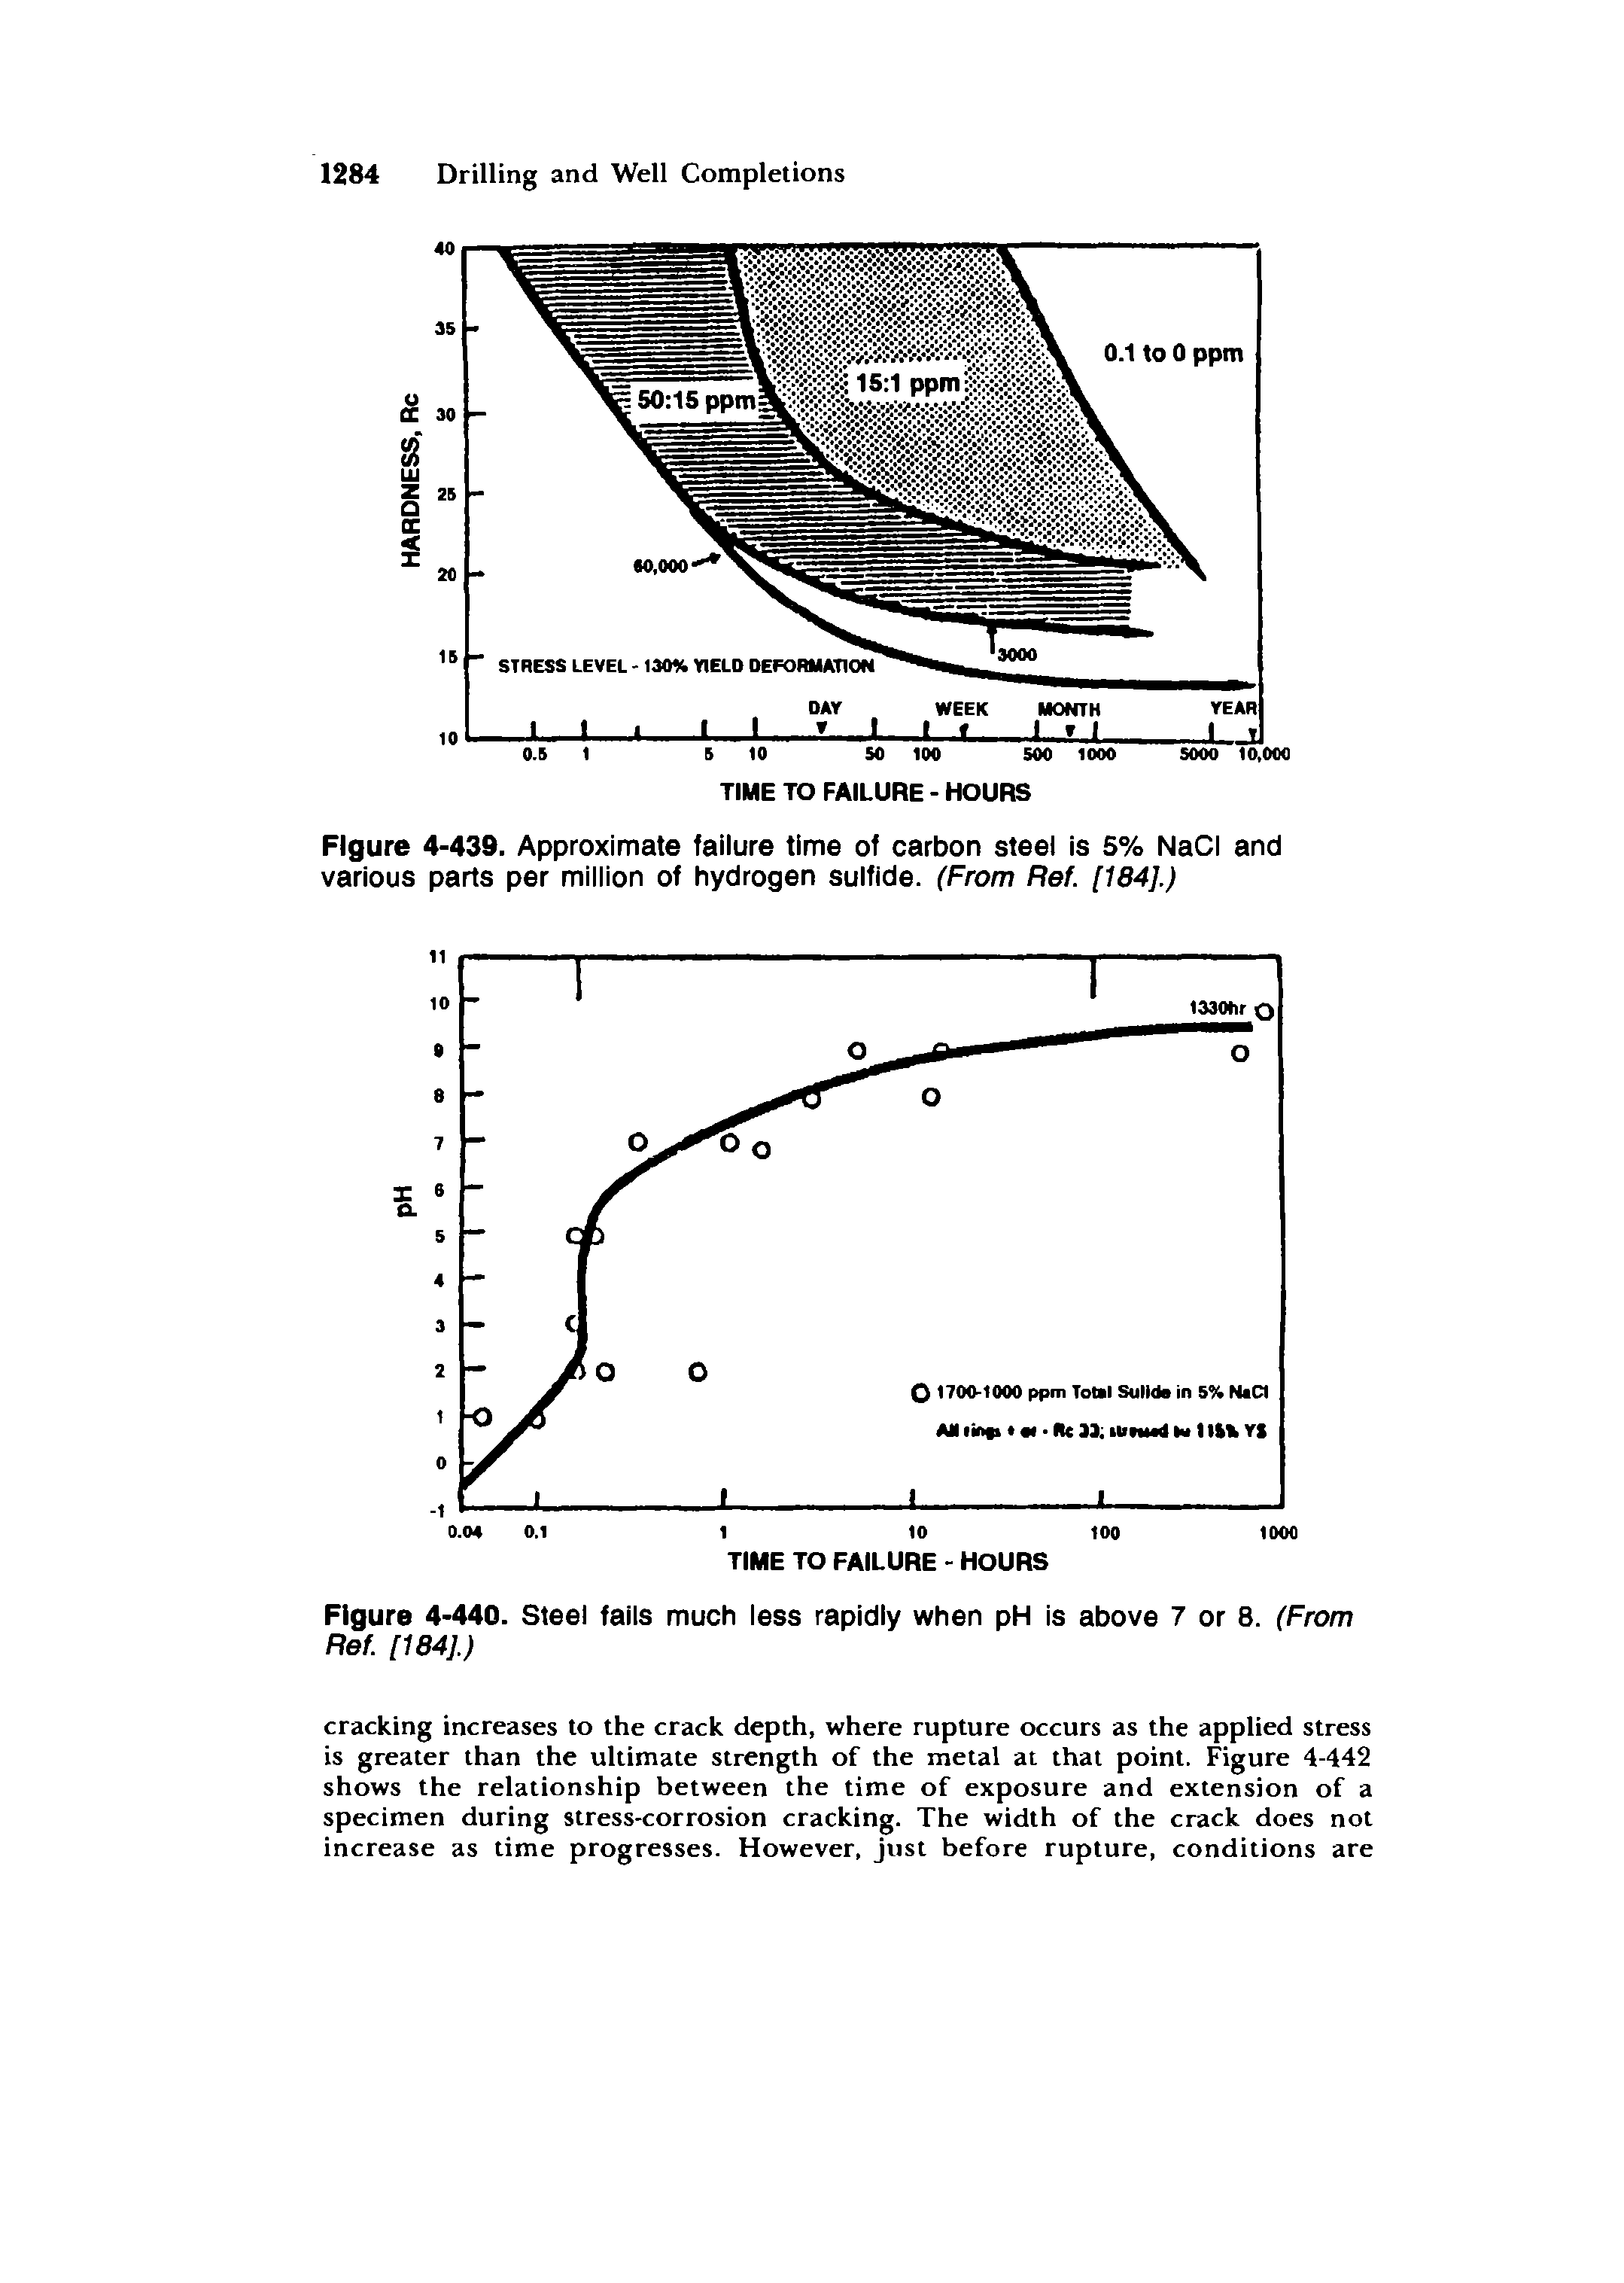 Figure 4-439. Approximate failure time of carbon steel is 5% NaCI and various parts per miiiion of hydrogen sulfide. (From Ref. [184].)...